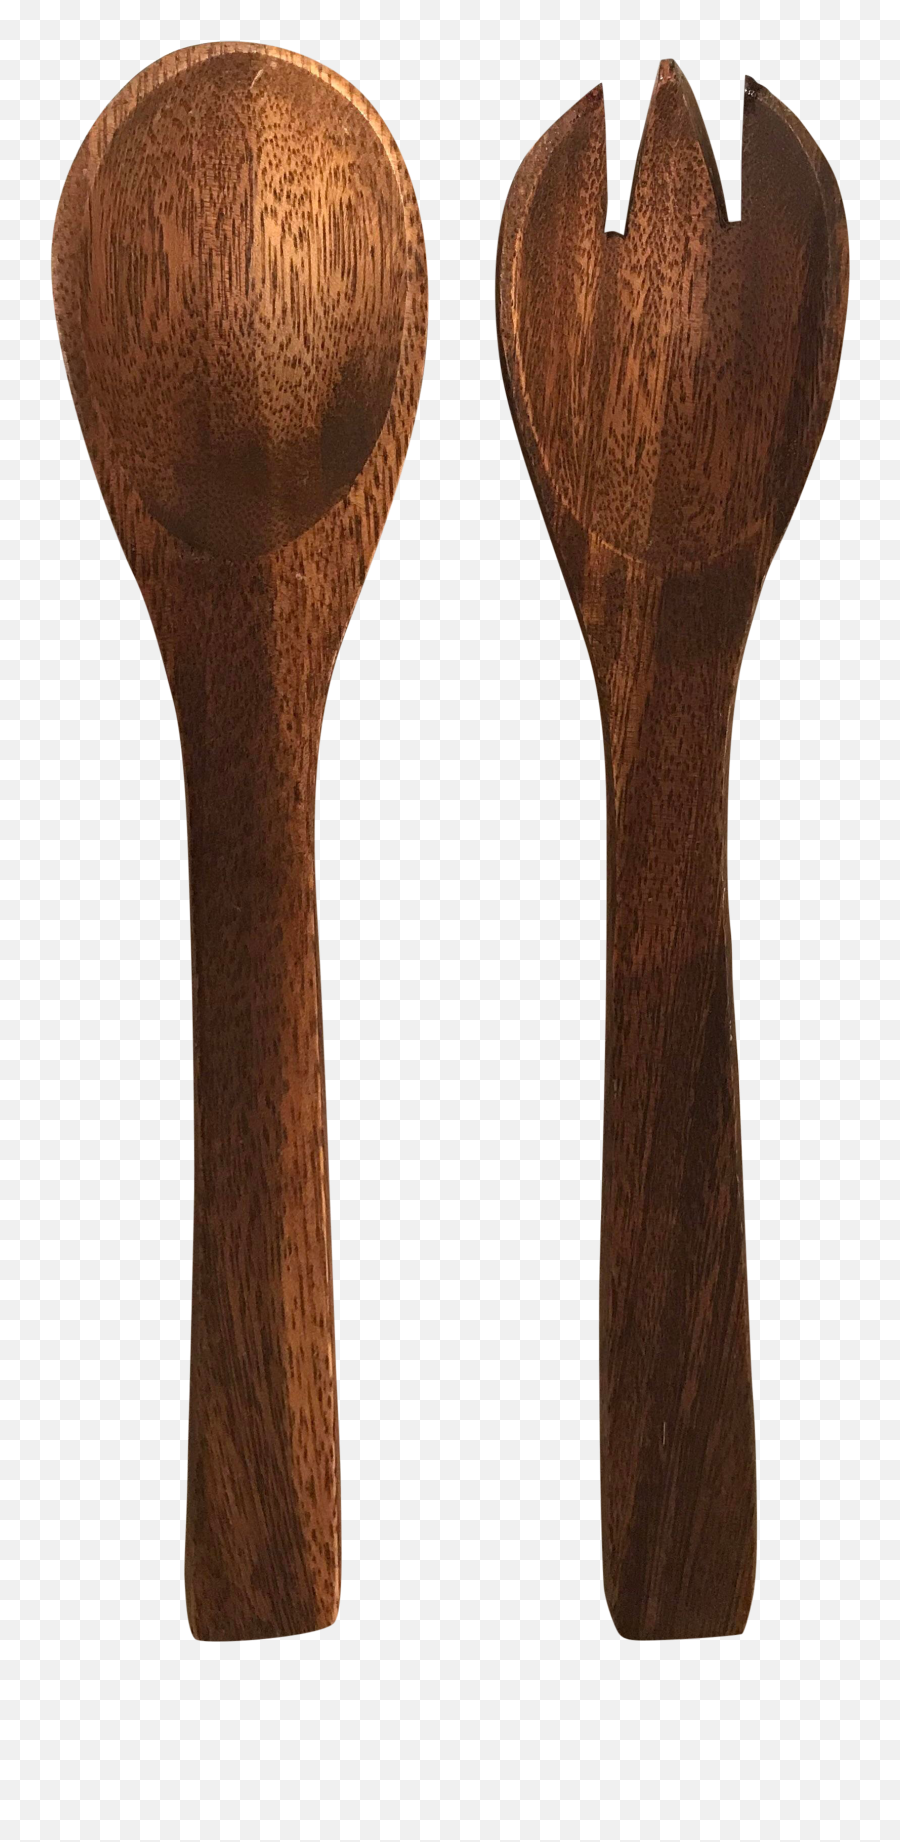 Vintage Wooden Serving Set - Pair Of Spoon And Fork Wooden Spoon And Fork Png,Spoon And Fork Png